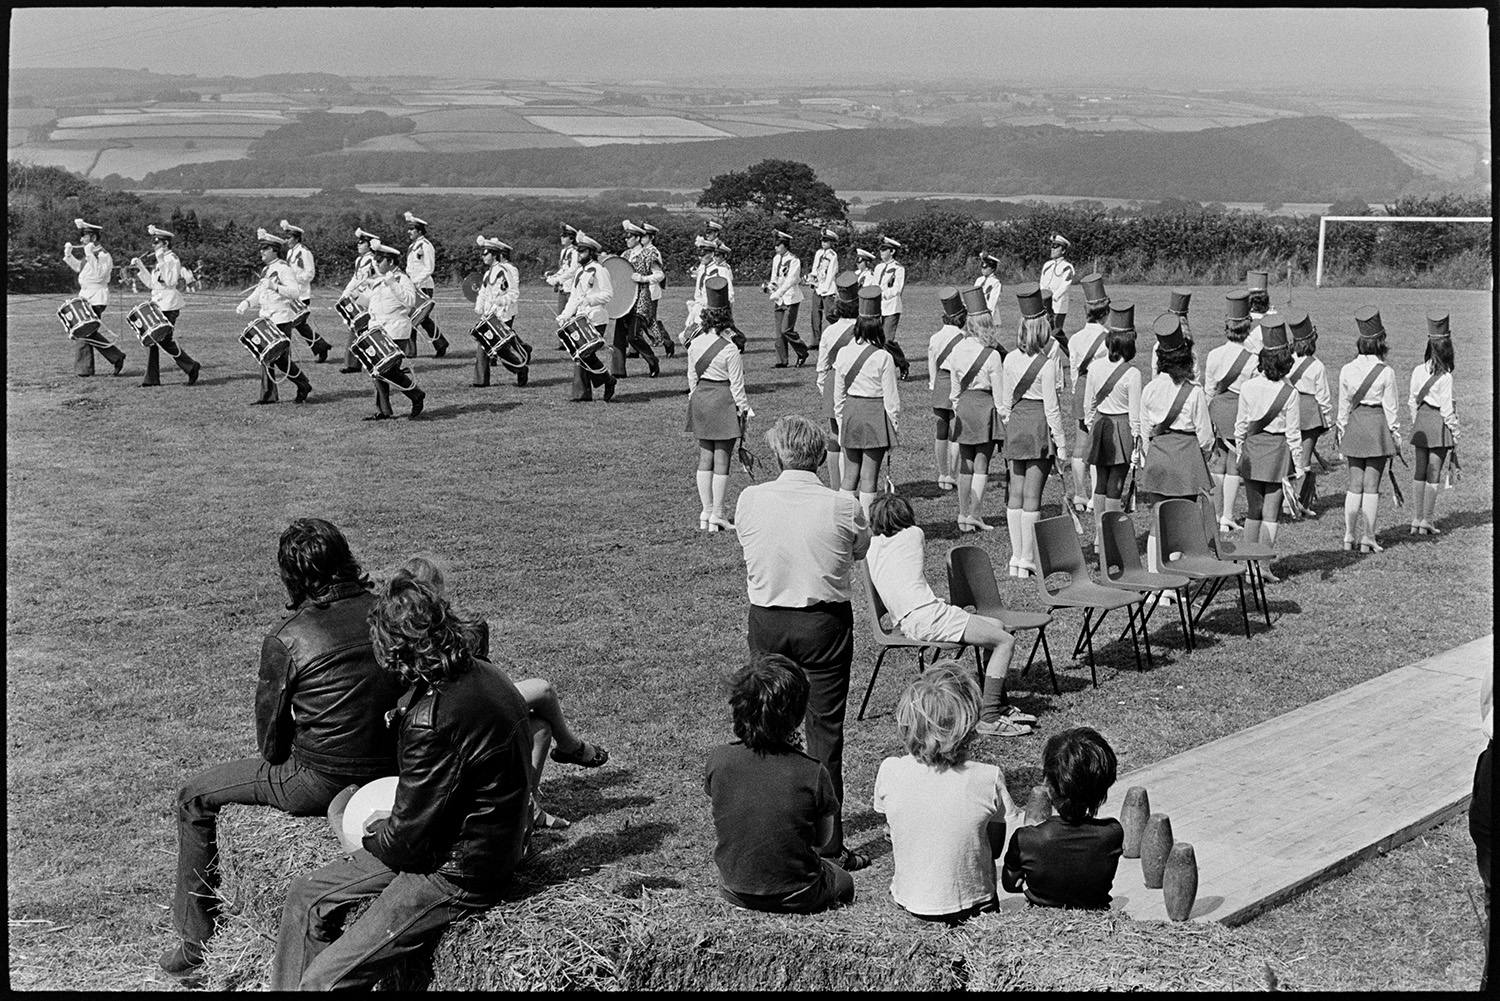 Band and drum majorettes on parade. 
[Majorettes and a drum band performing at Atherington Village fete. People are watching from a skittle alley set up by hay bales.]